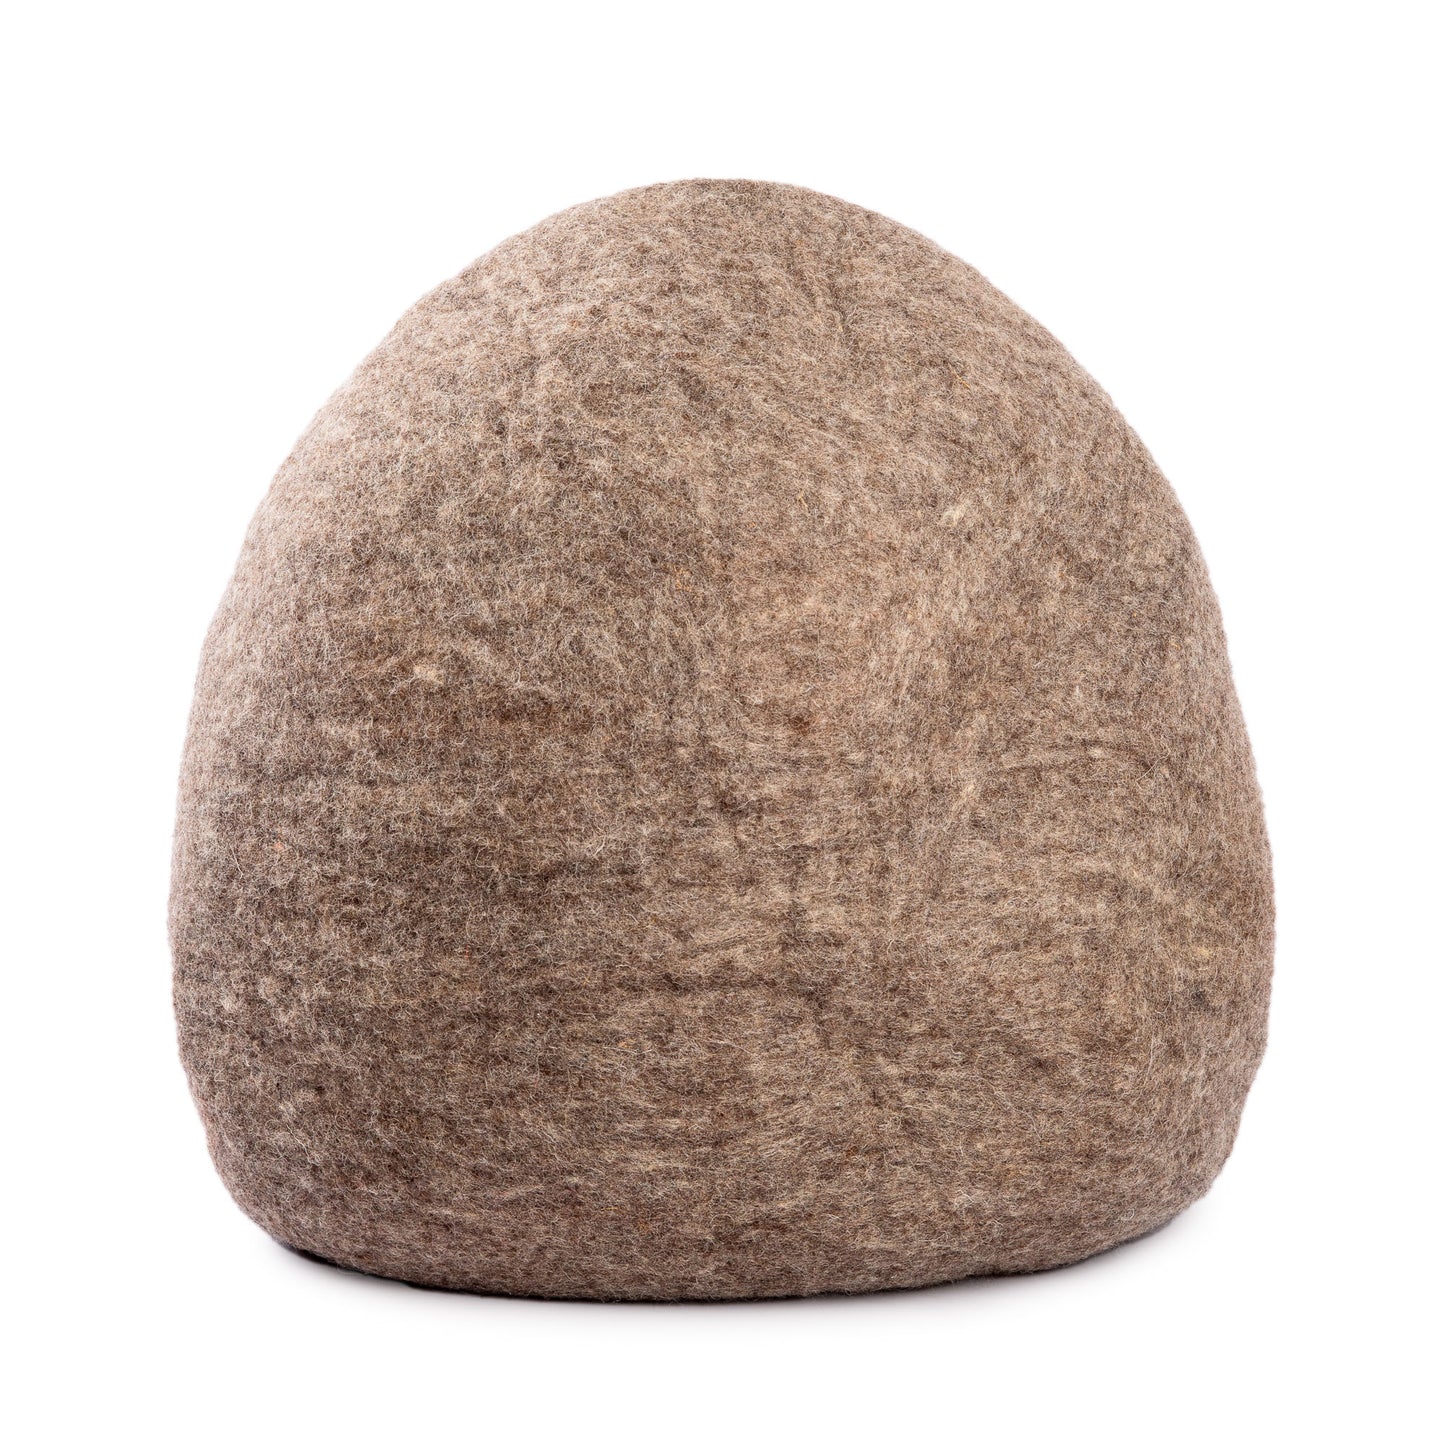 Luxurious Premium Merino Felted Cat Bed - Cozy & Stylish Comfort for Your Feline Friend